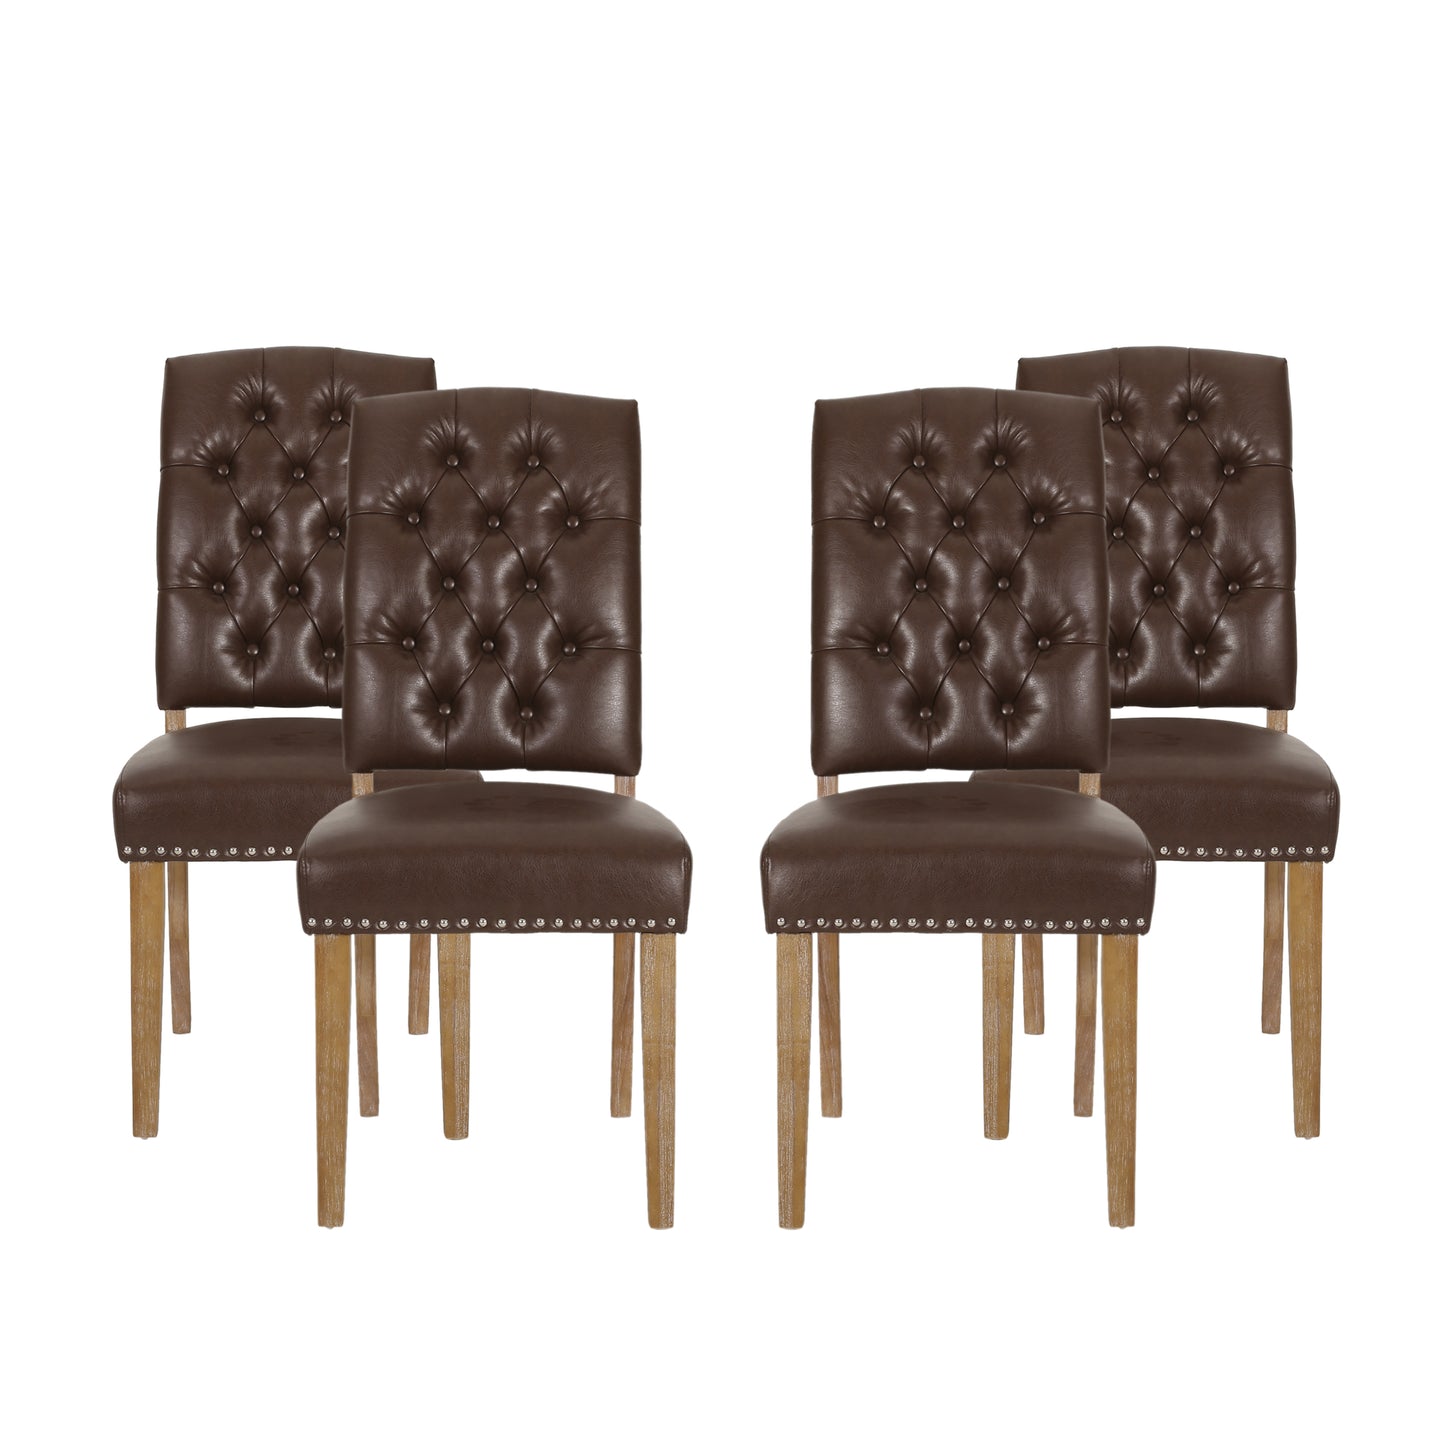 Frances Contemporary Faux Leather Tufted Dining Chairs with Nailhead Trim, Set of 4